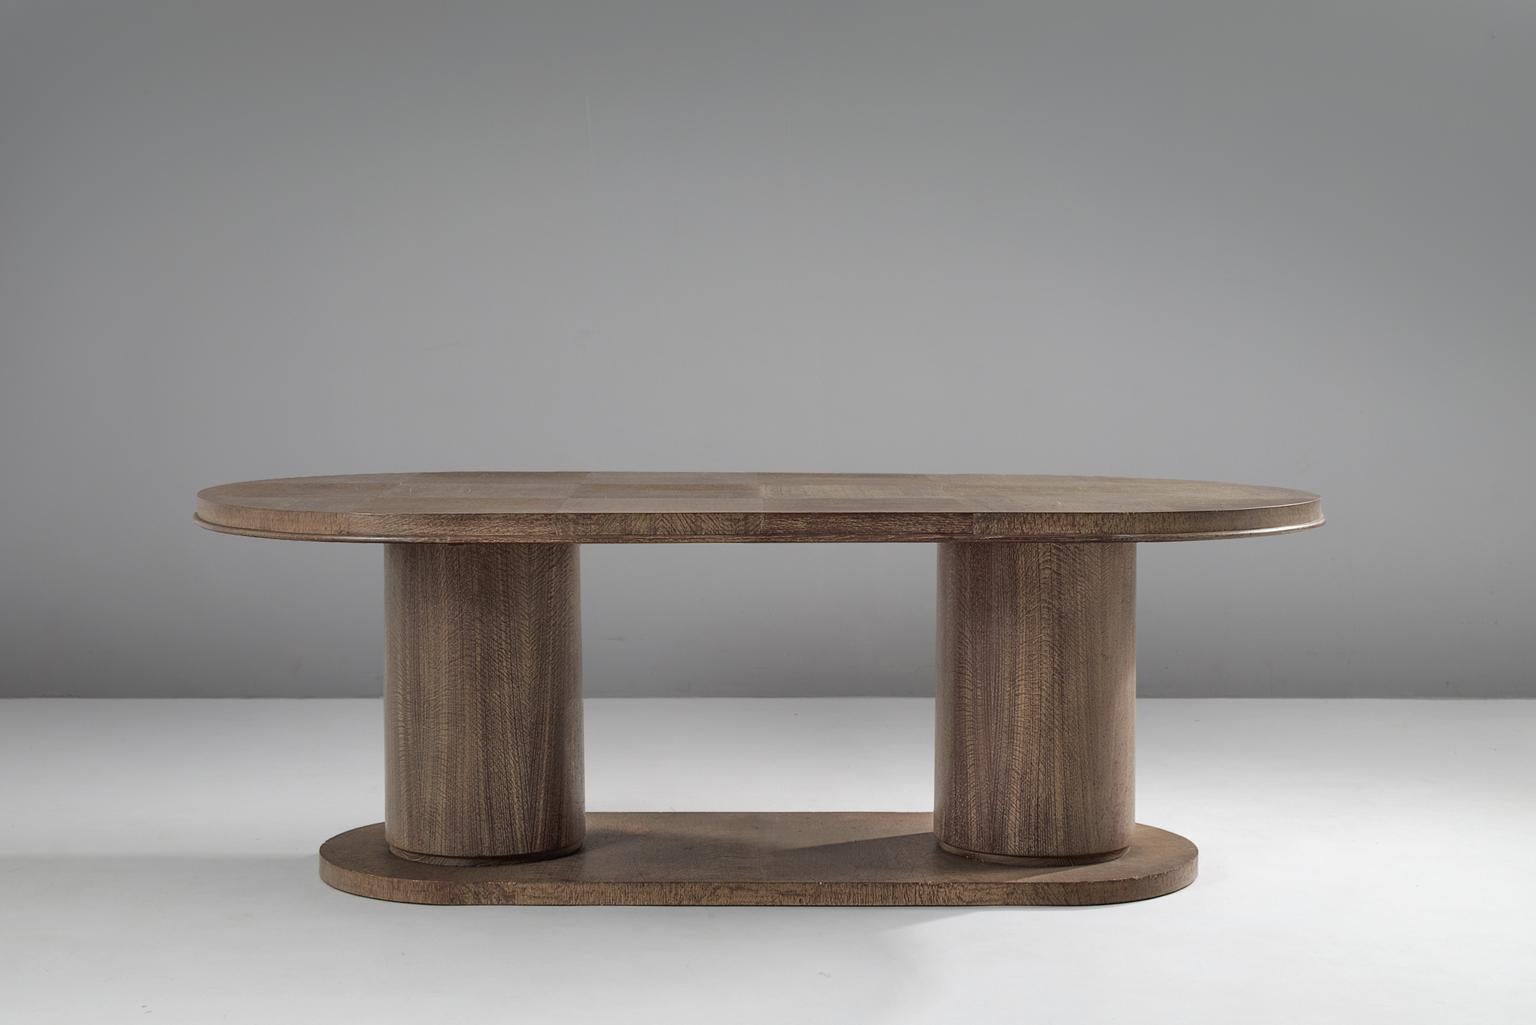 Dining table, in cerused oak, by De Coene, Belgium, 1930s. 

Imposing large oval center table. This table has a strong and sturdy appearance, due the two column base. While the design looks simplistic, the top is highly detailed. The oval shaped